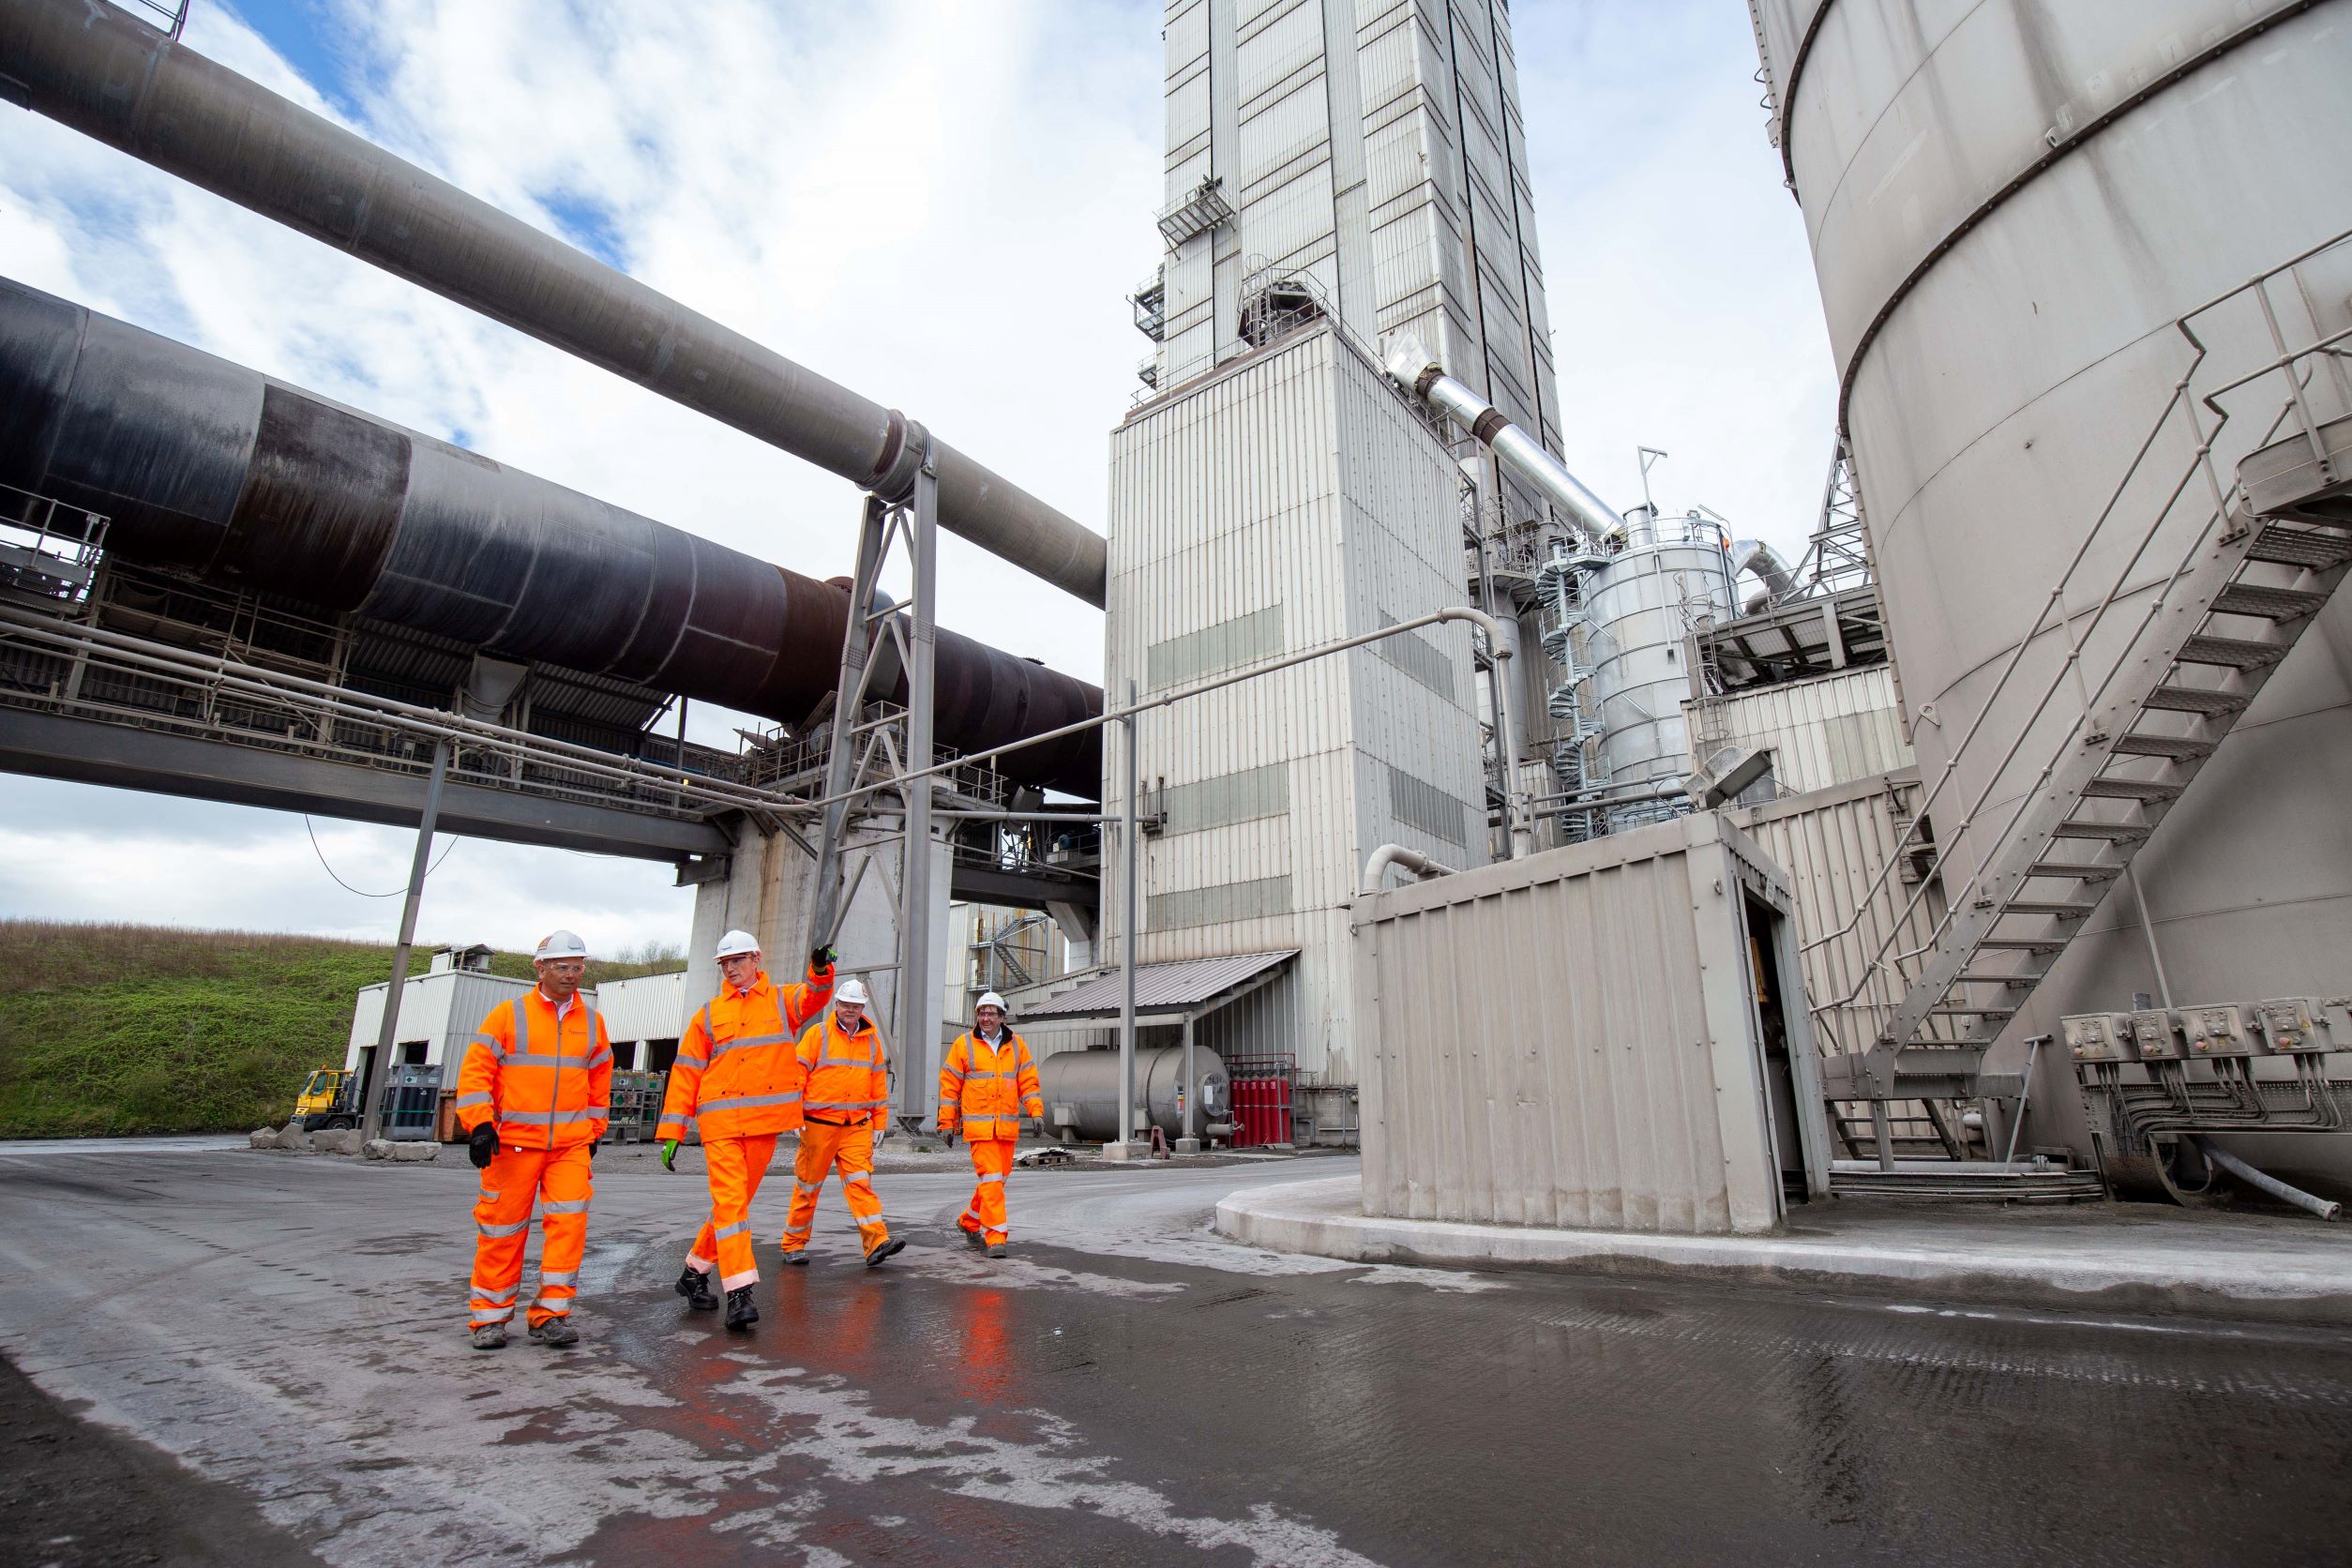 From left: Hanson UK CEO Simon Willis, David TC Davies MP, Minister for Wales, Padeswood cement works plant manager David Quick and Iain Walpole, Hanson’s head of process and sustainability – CCS, at Hanson’s Padeswood facility